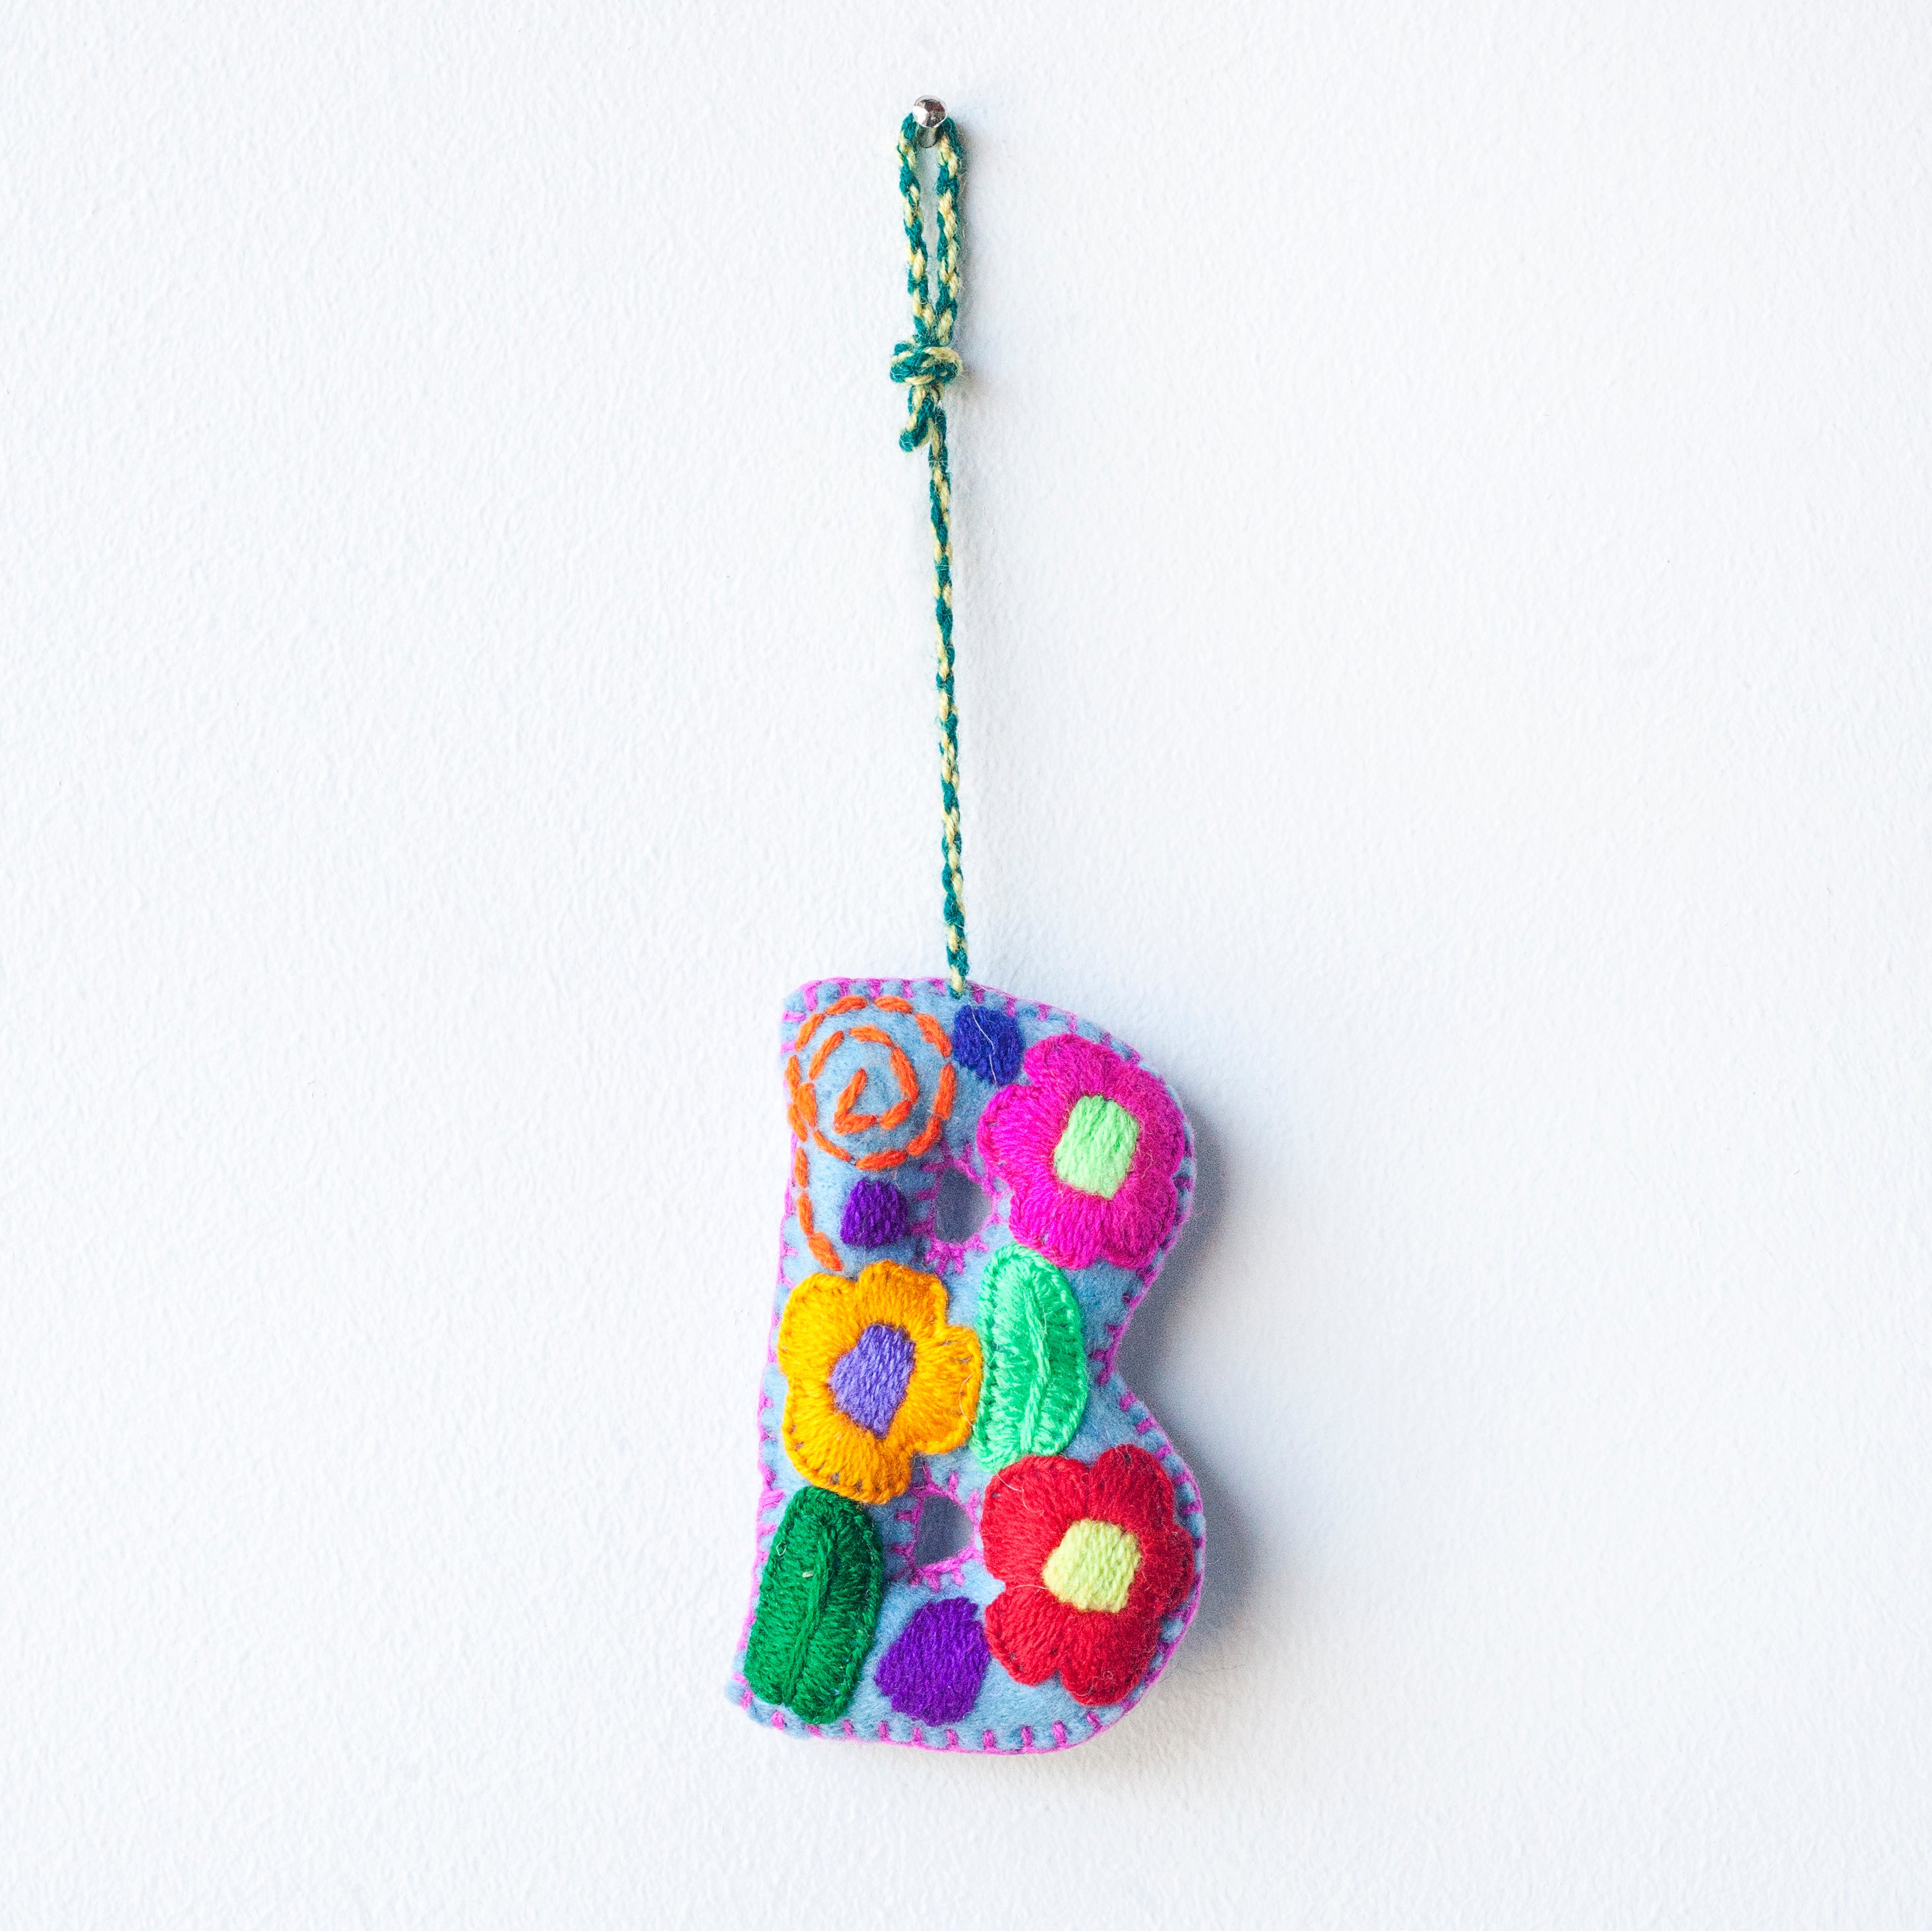 Colorful felt letter "B" with multicolor floral hand-embroidery hanging by a colorful string.